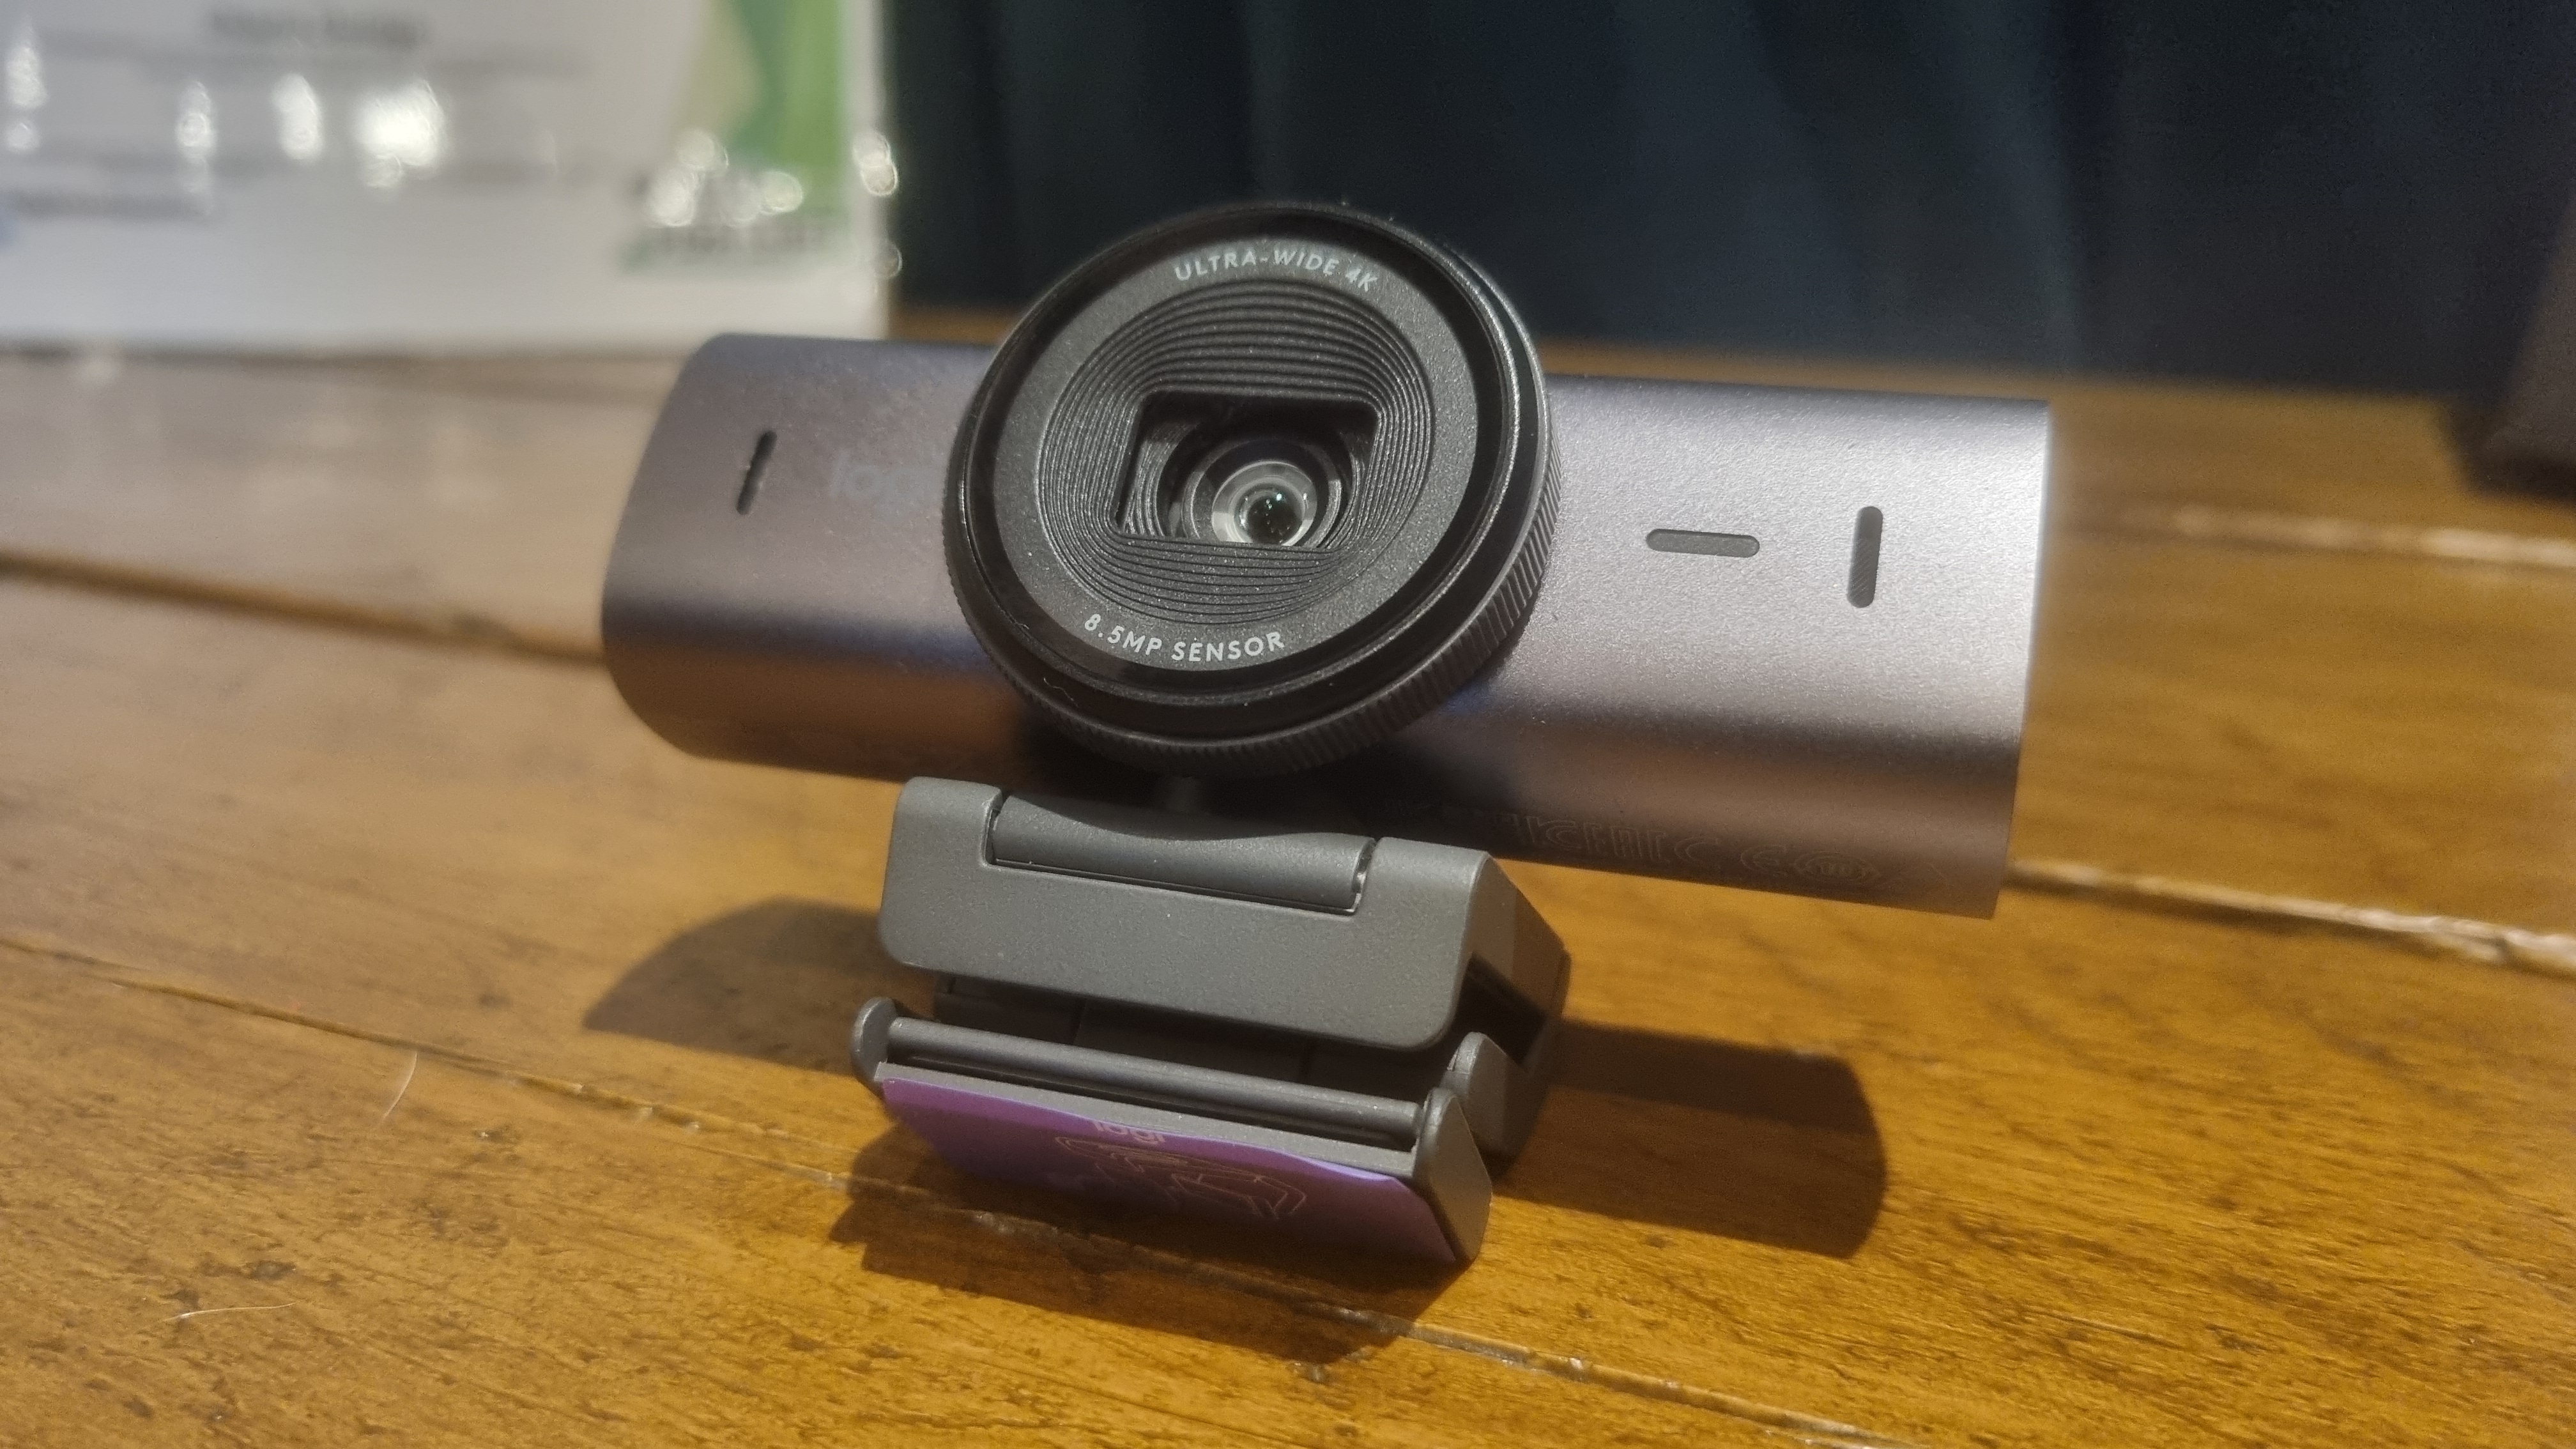 The Logitech MX Brio webcam attached ot its stand, folded up on a wooden table